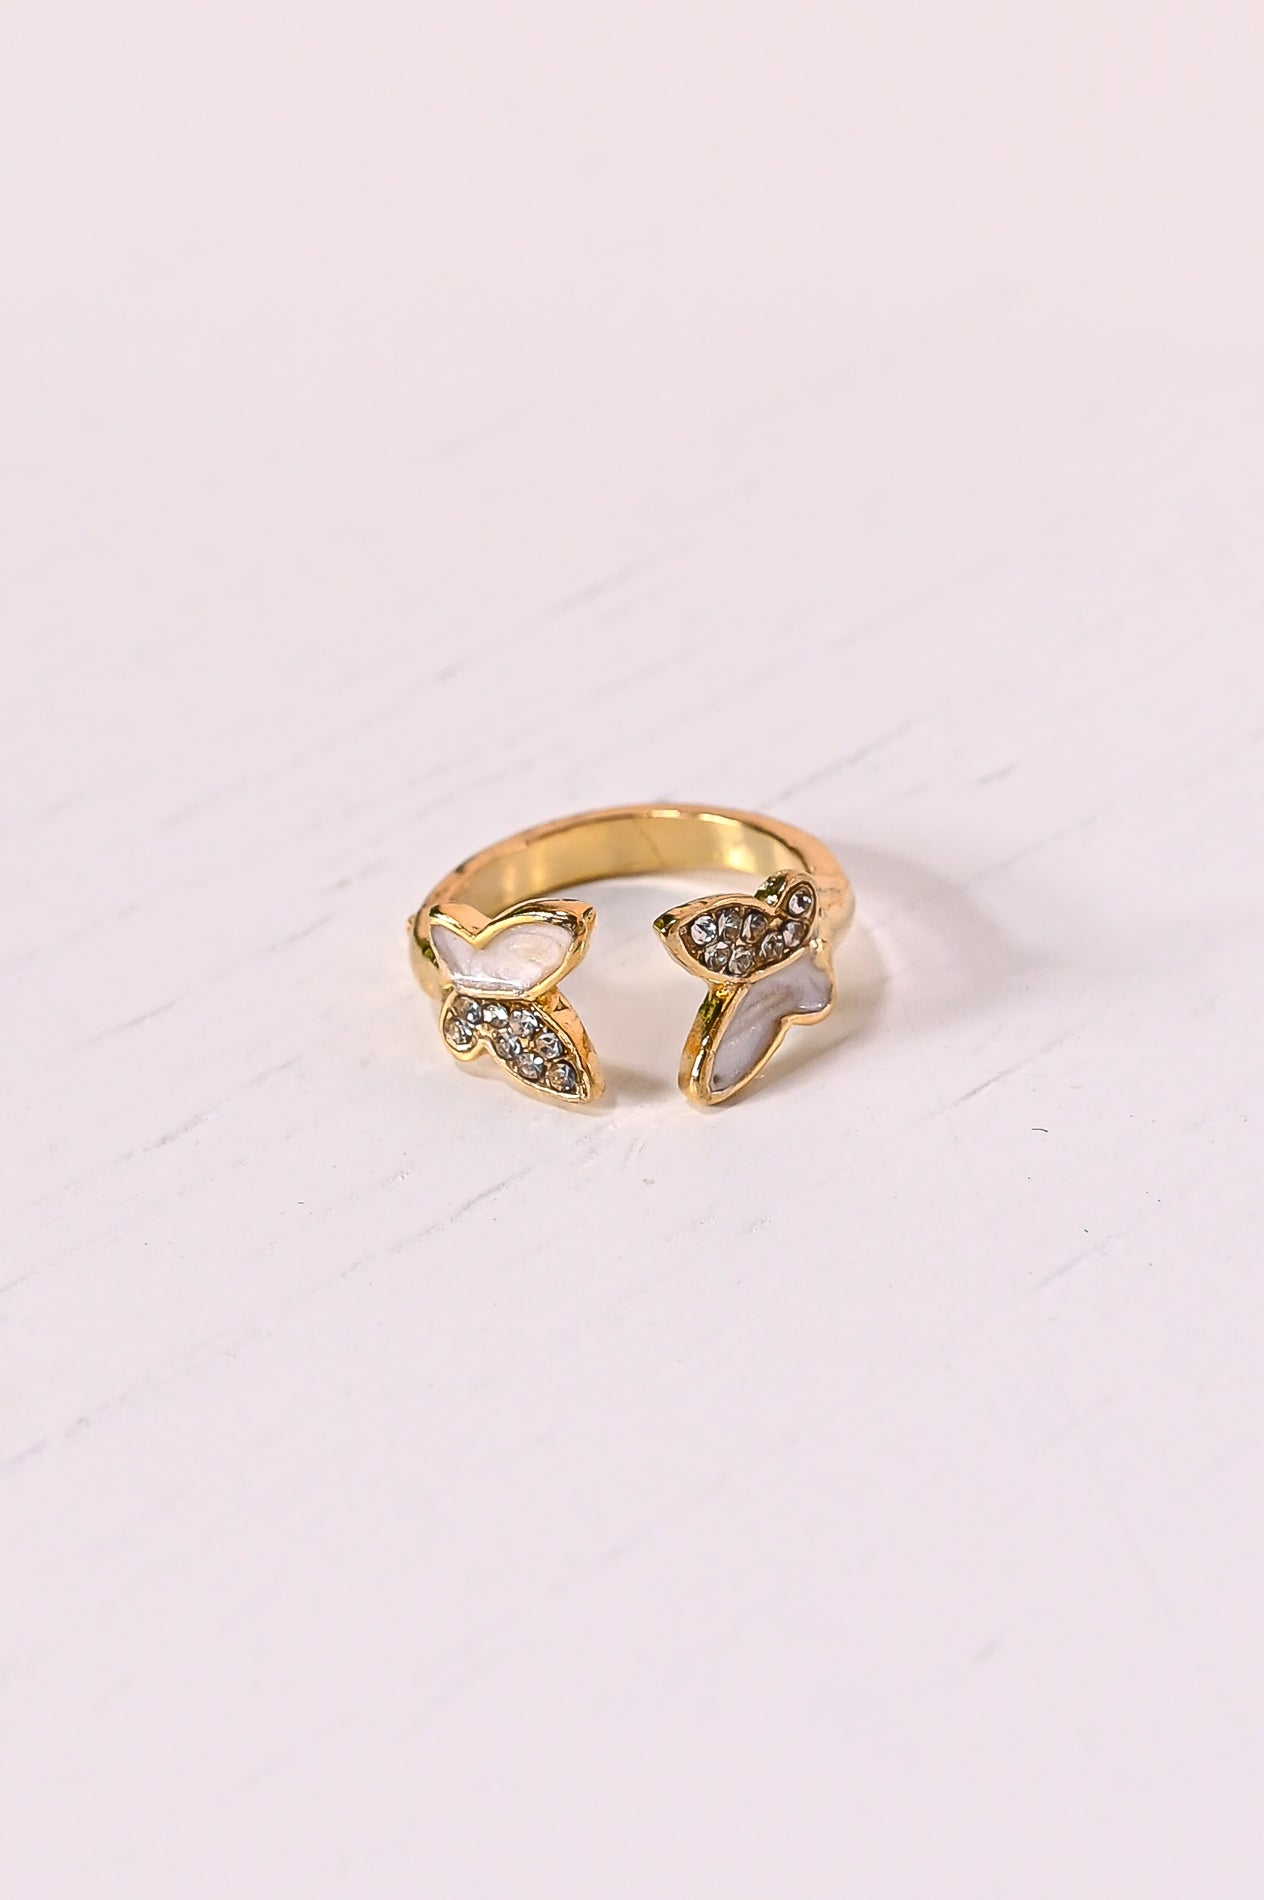 Gold/Bling 5-Piece Ring Set - RNG1101GO